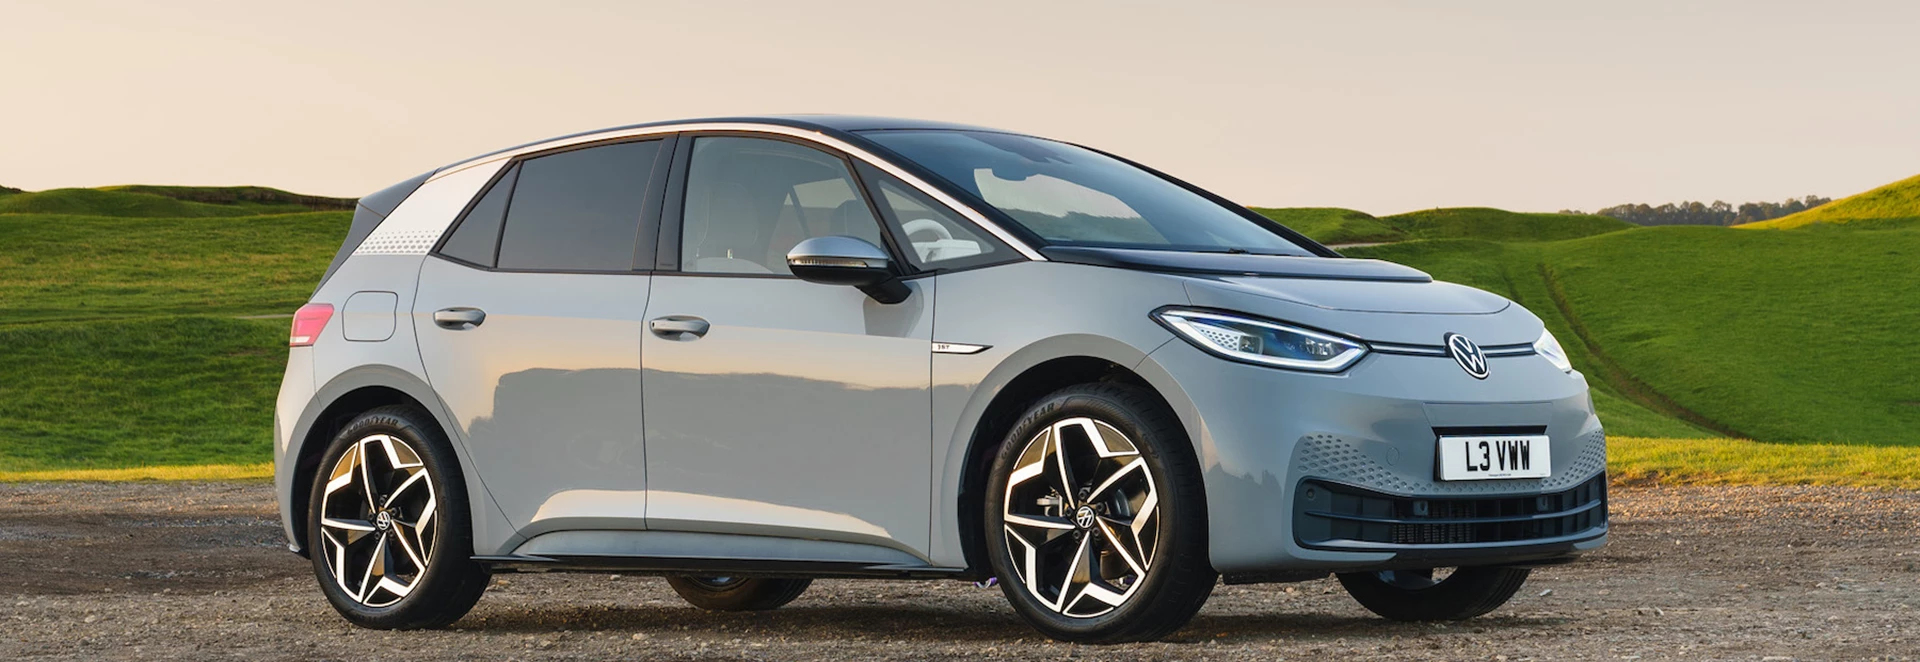 10 Best new EVs for less than £30,000 